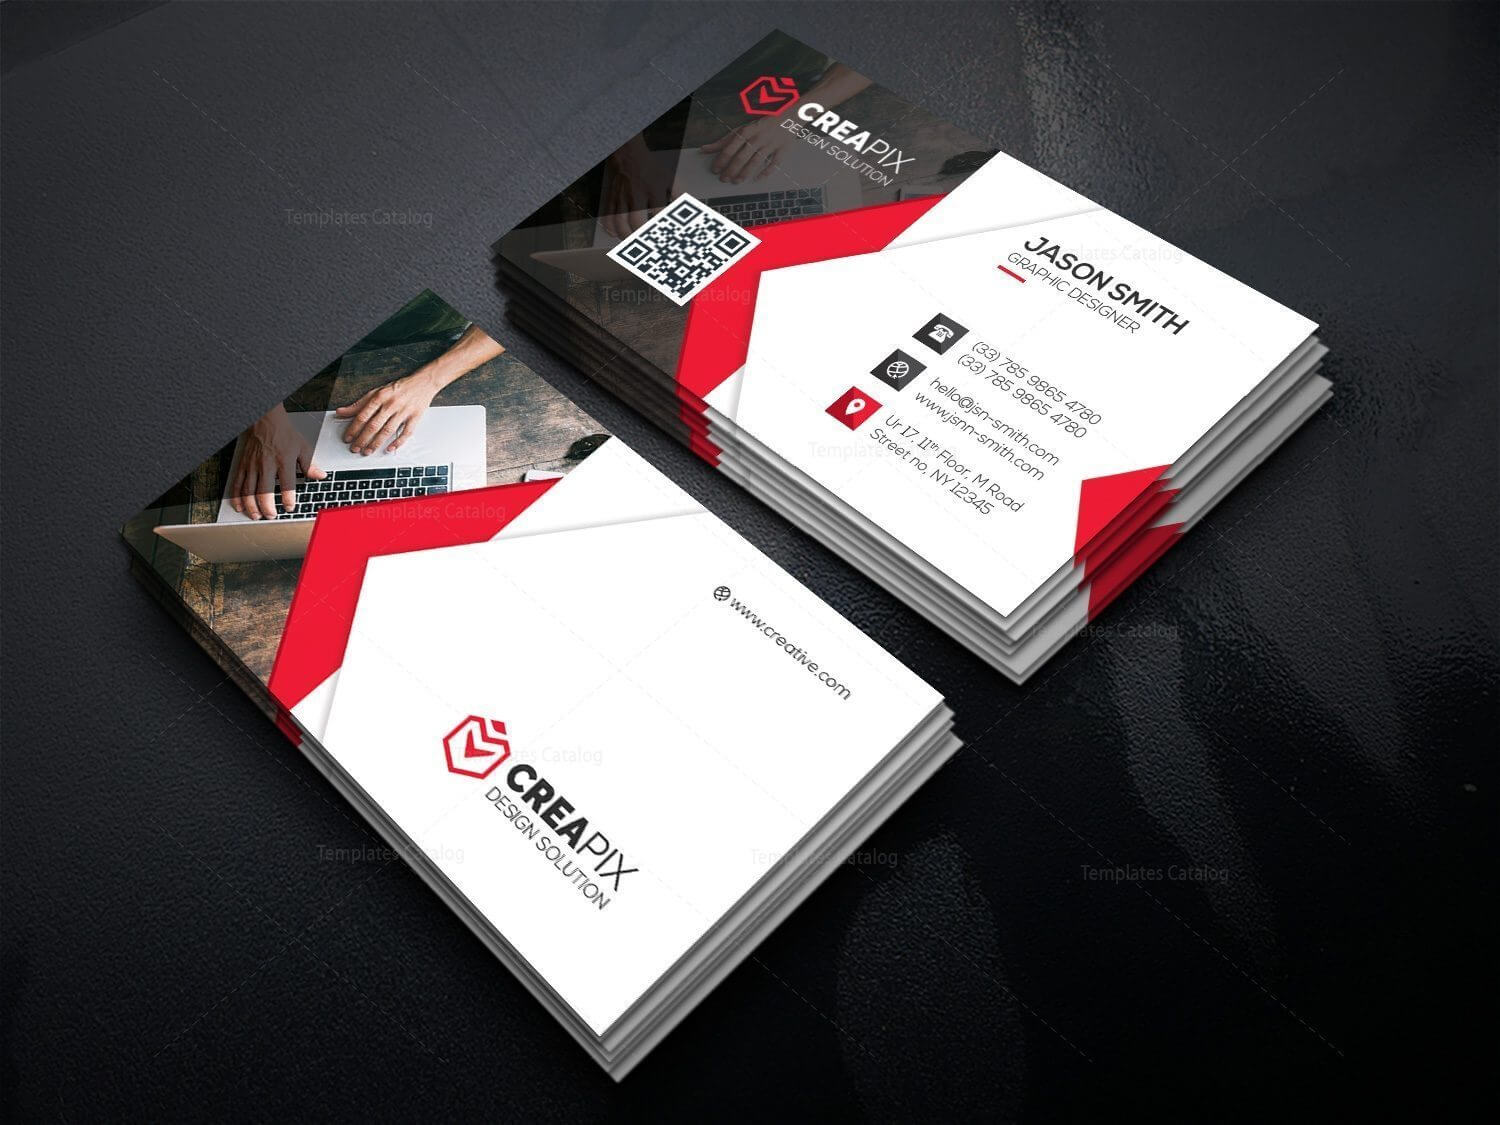 020 Personal Business Card Template 4Fit15002C1125Ssl1 Pertaining To Free Personal Business Card Templates